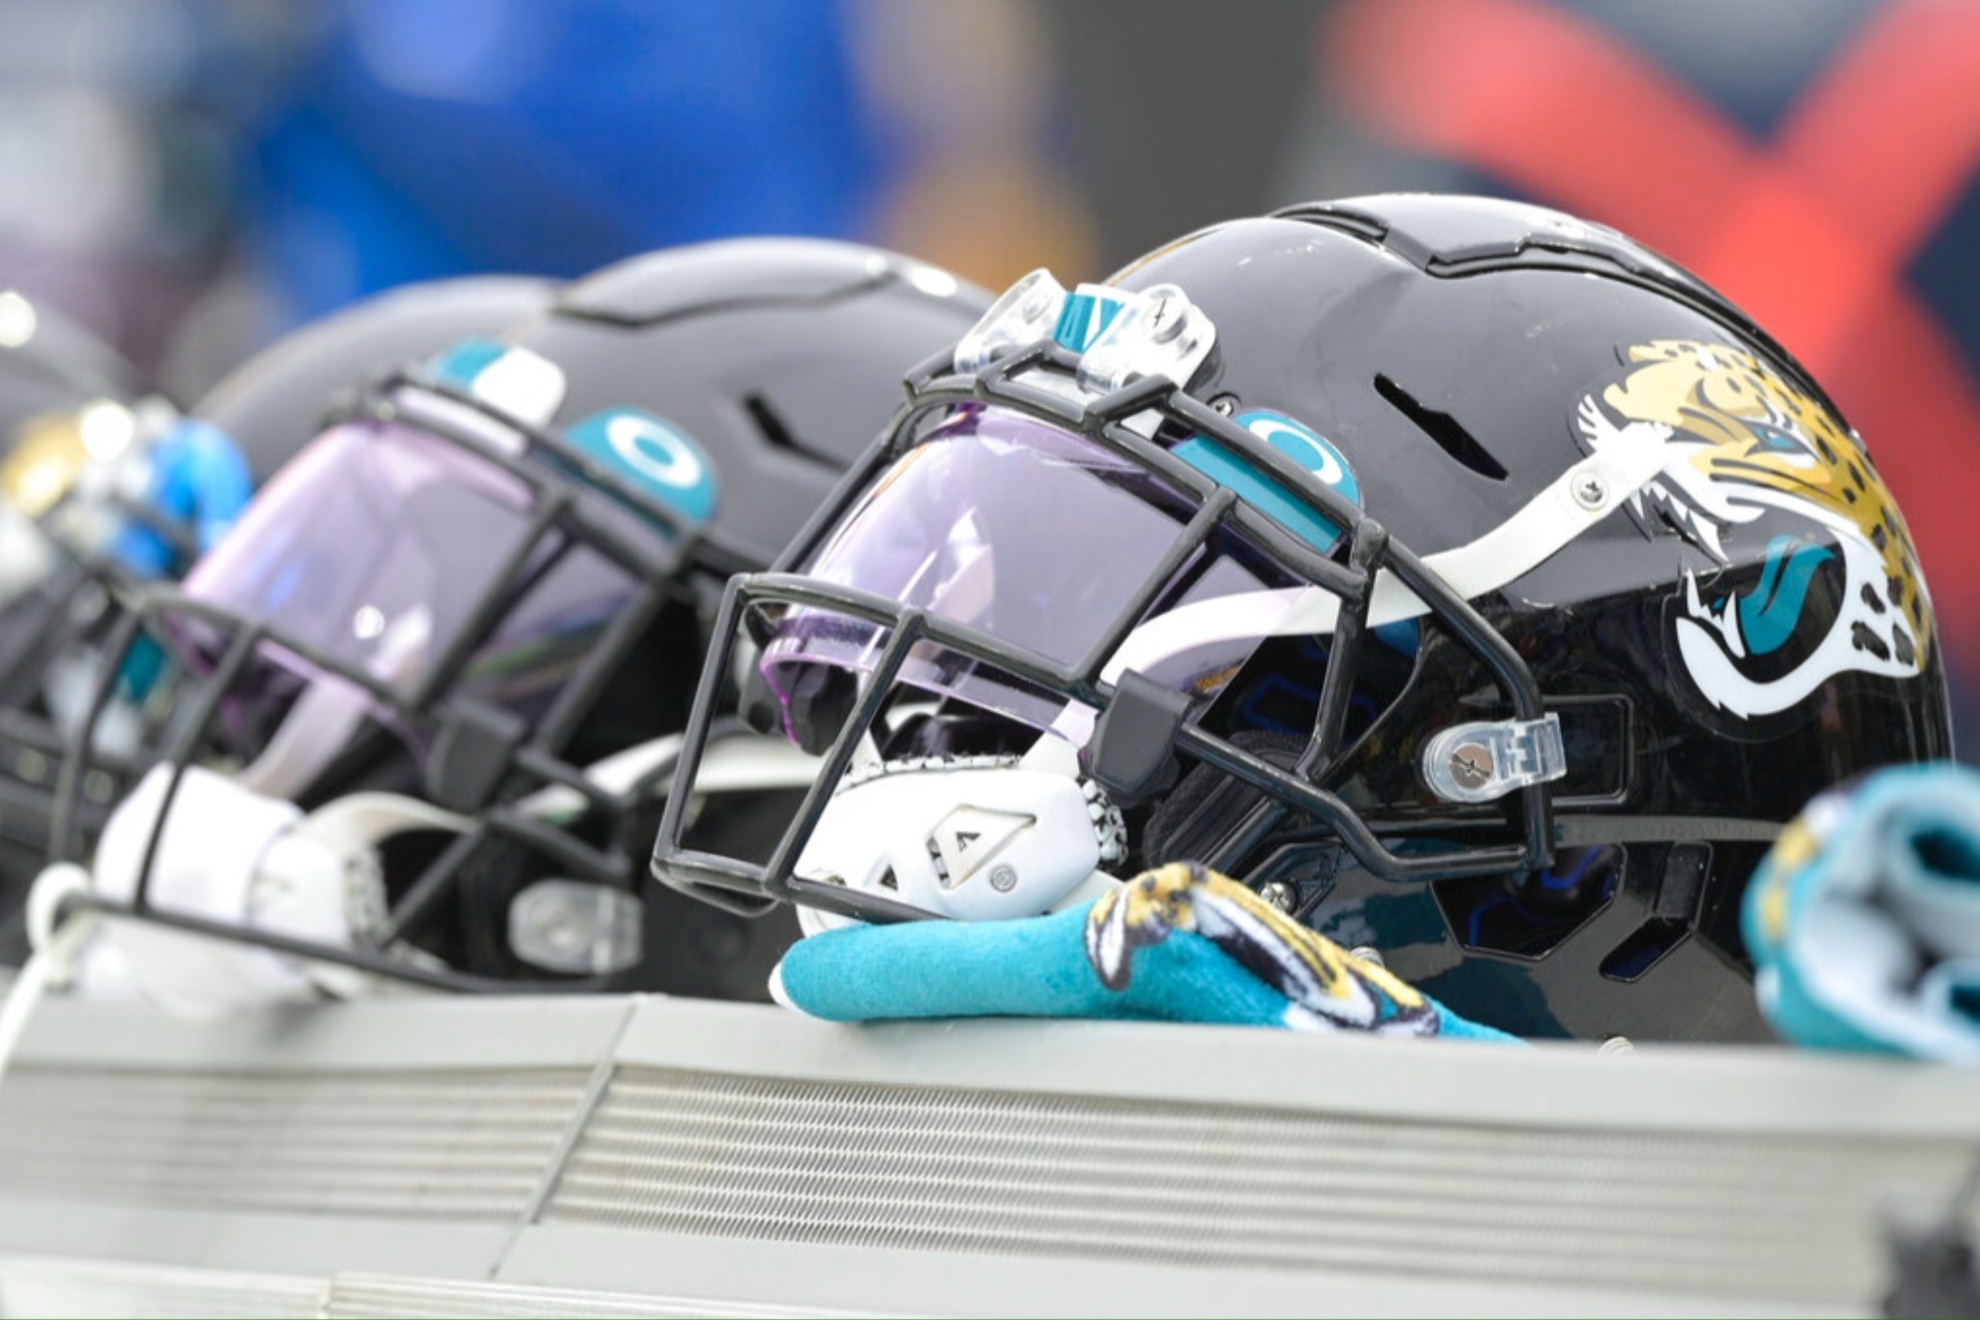 A former employee of the Jacksonville Jaguars was accused of fraud